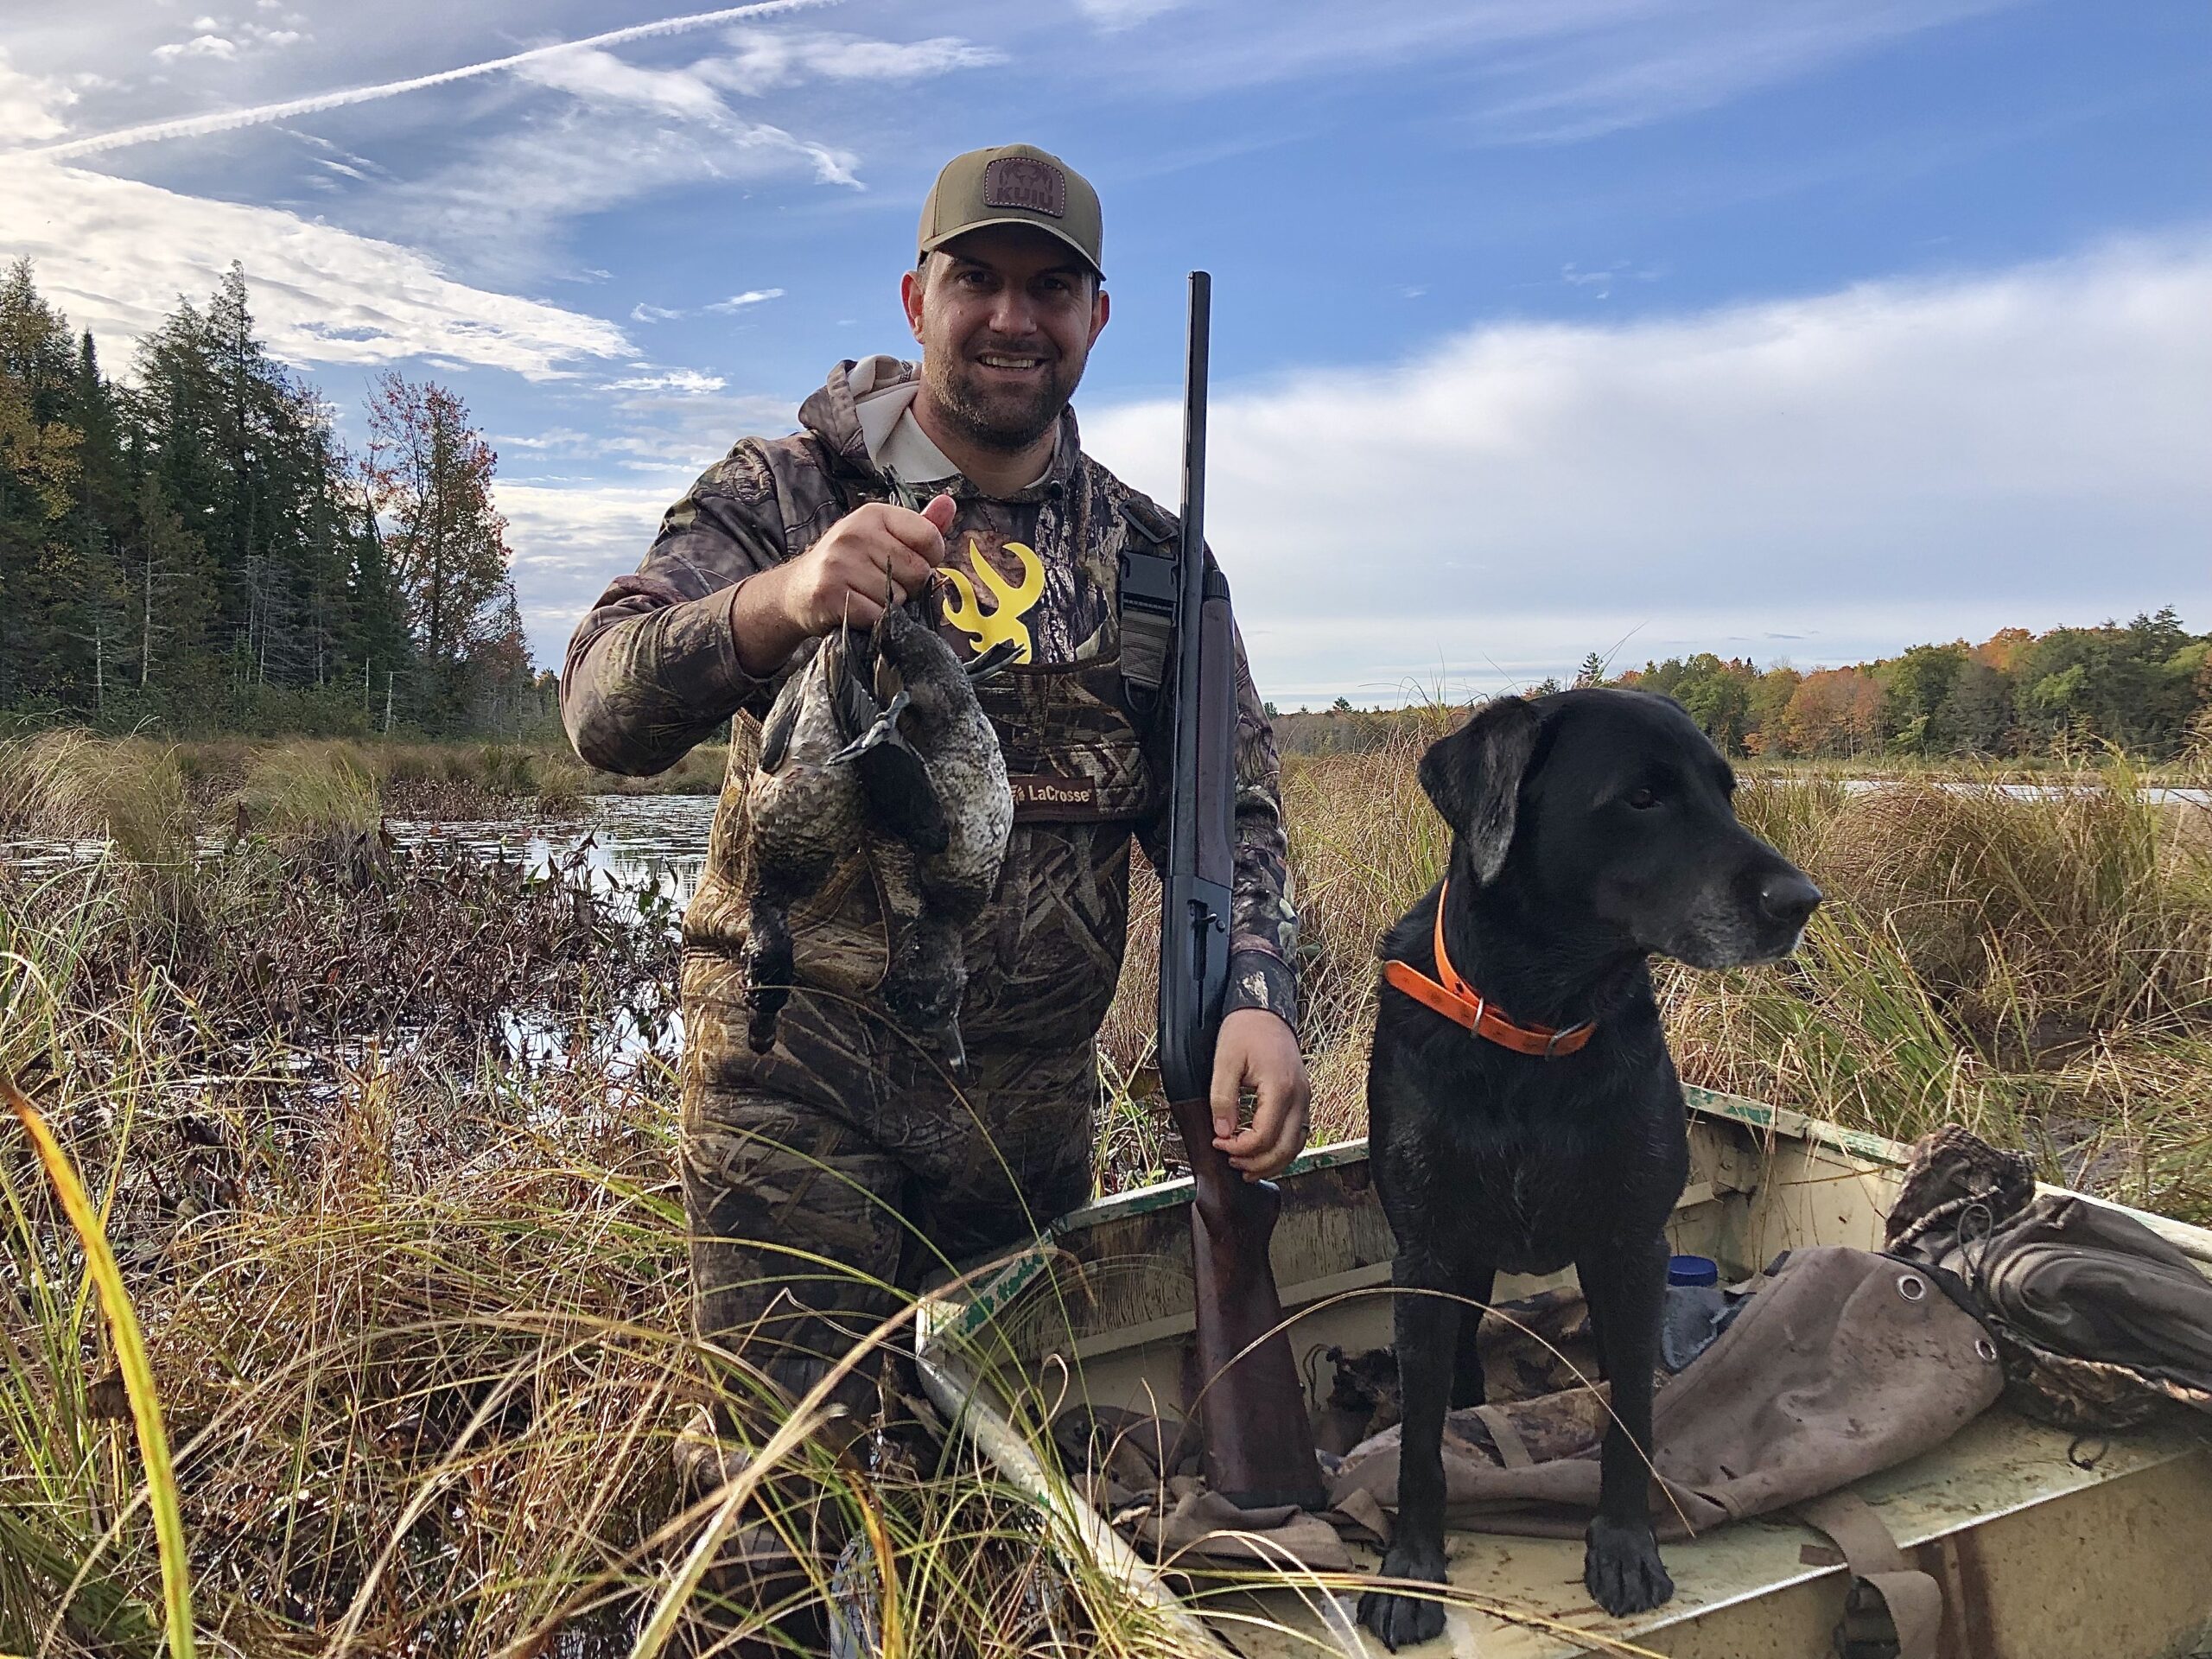 Both Beretta and Benelli excel in the blind.